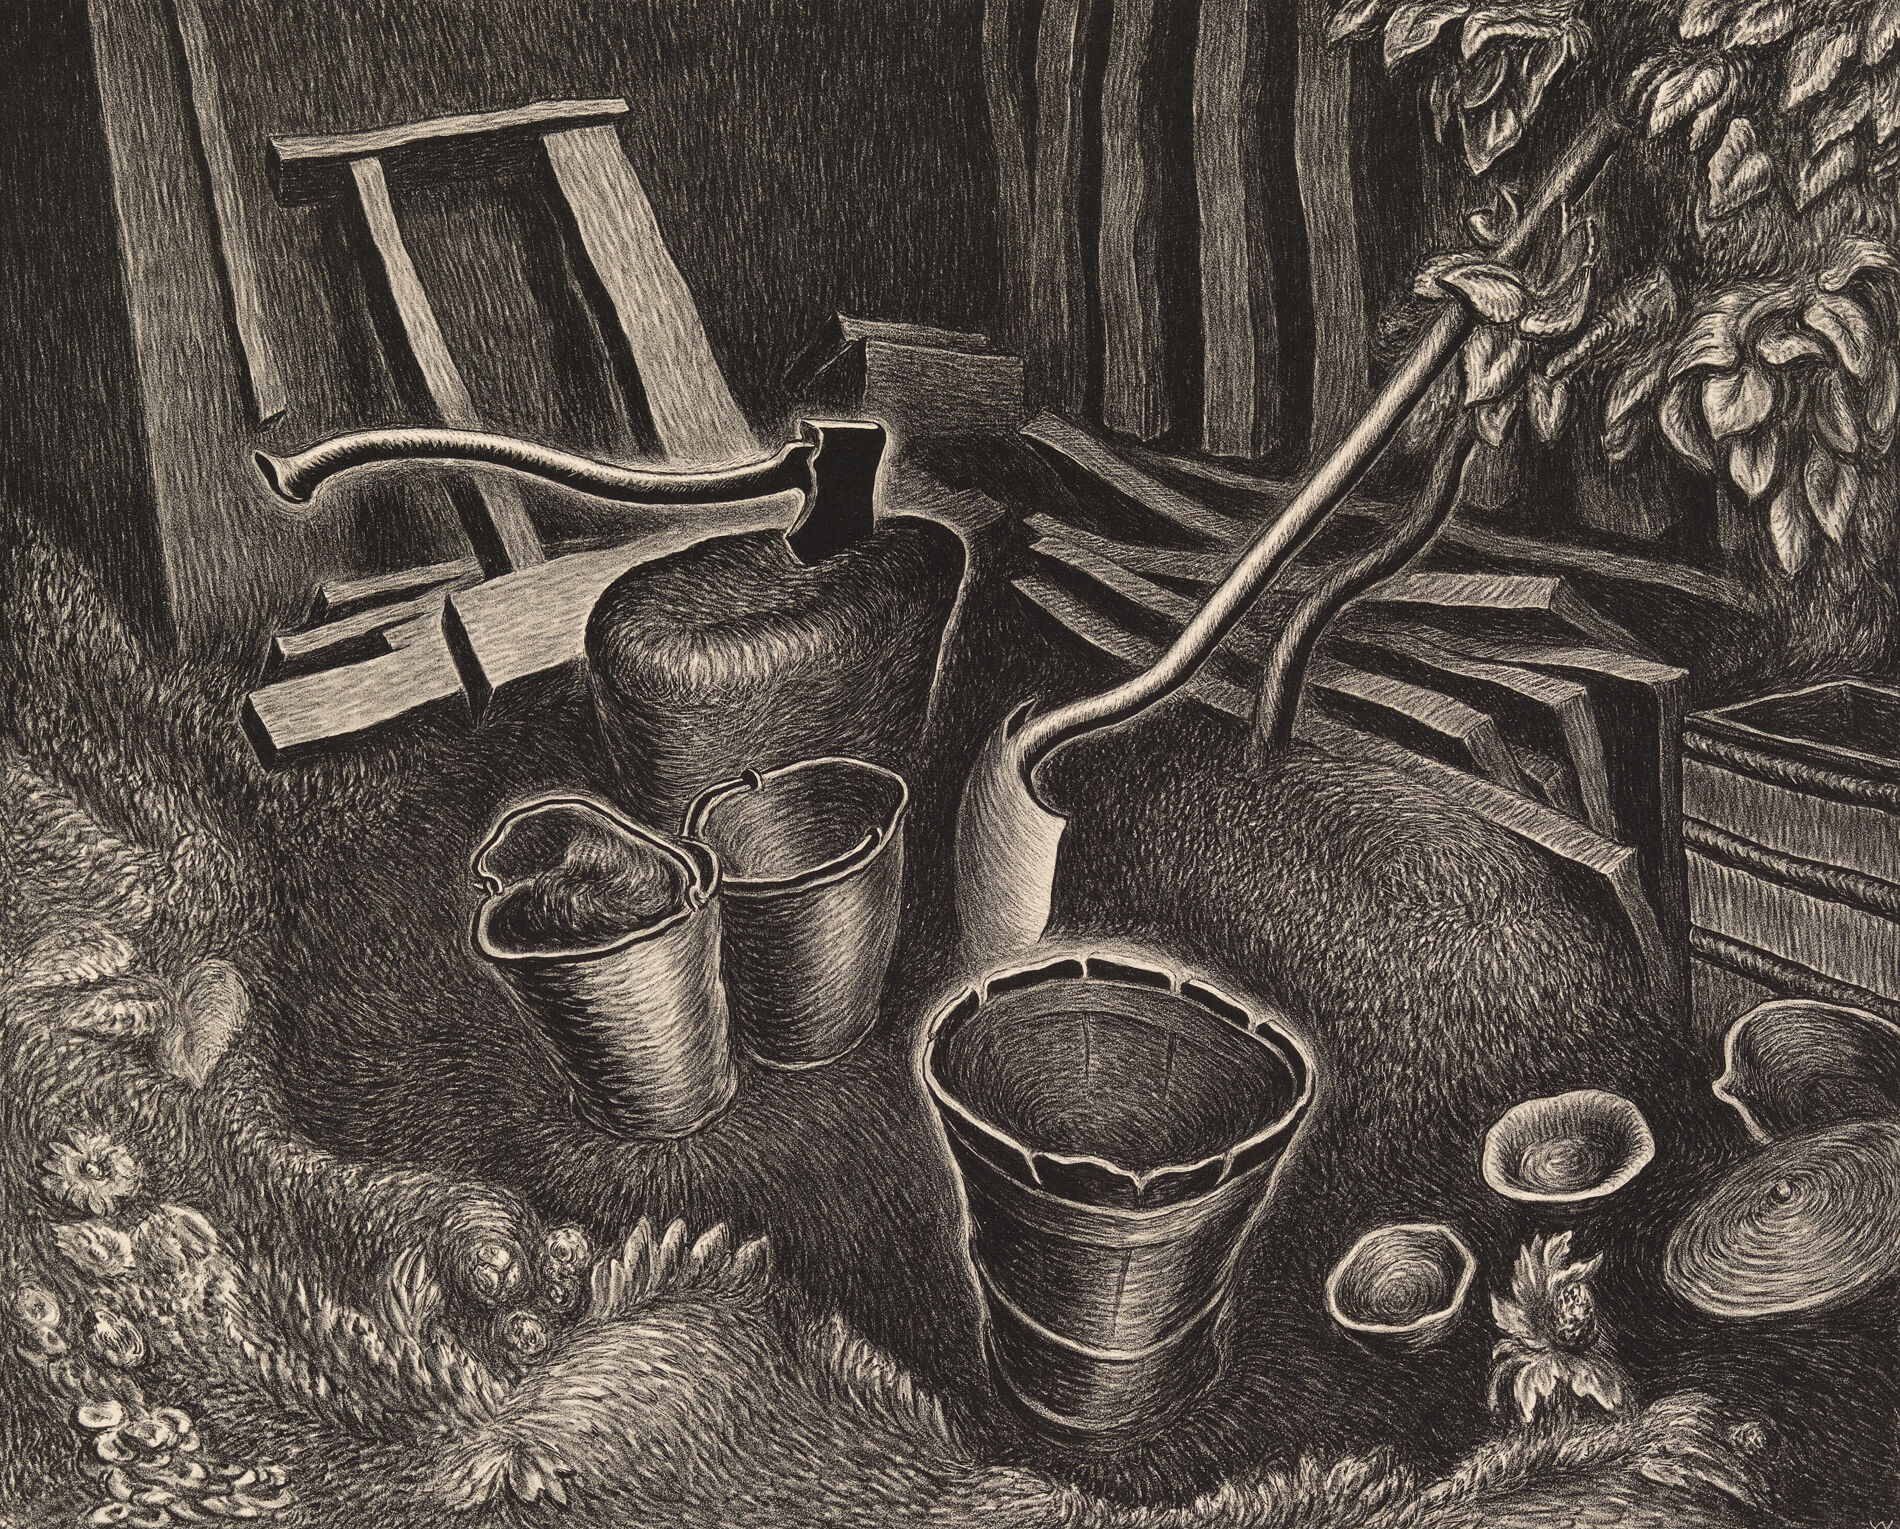 Detailed black and white etching of garden tools and objects, including buckets, a watering can, and a broken chair.